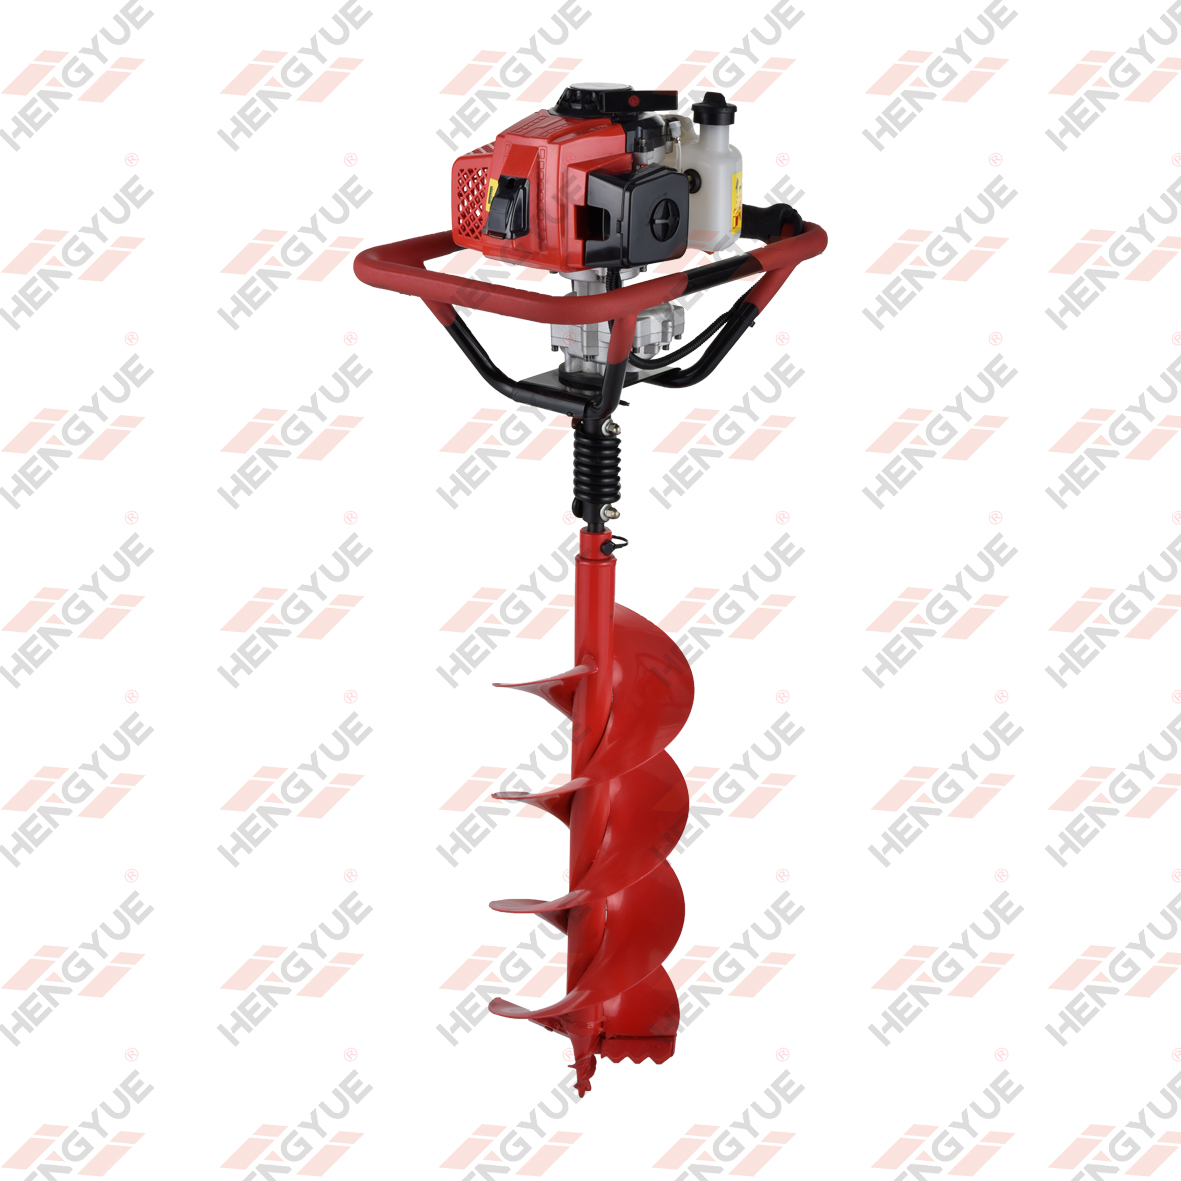 63/68cc Populer Post Hole Earth Auger Drilling Machine